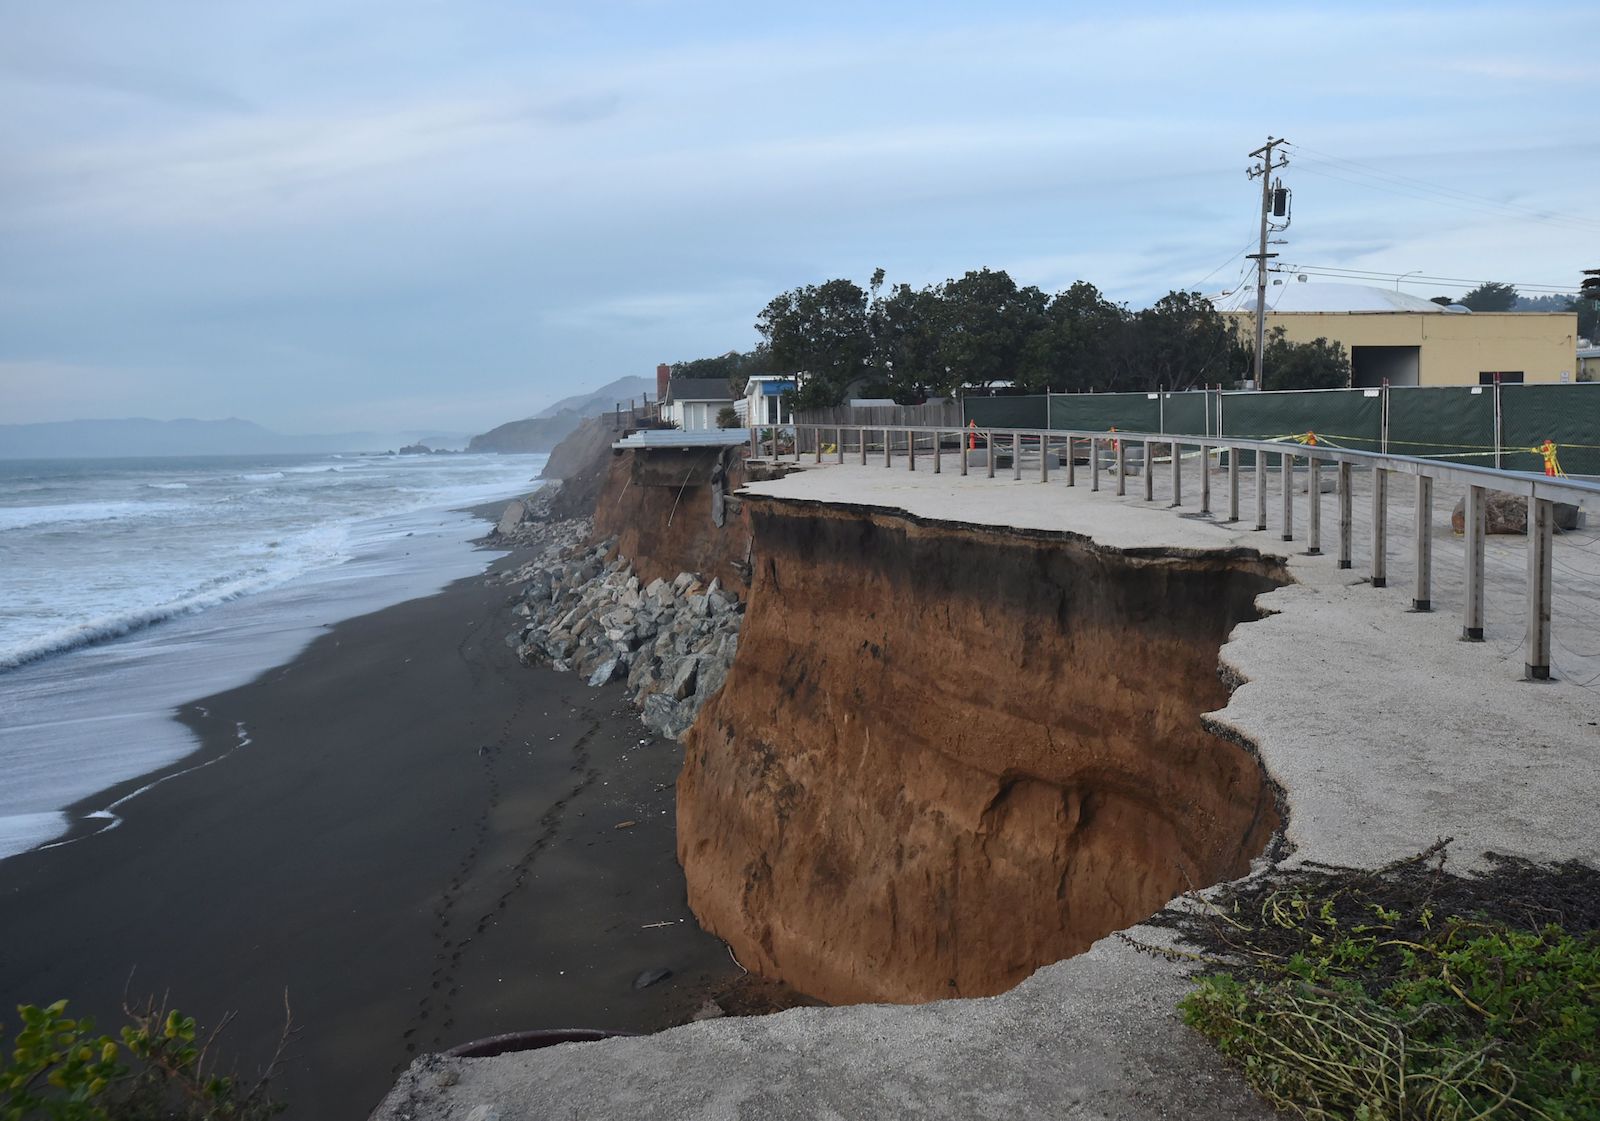 A high cliff-side road near the ocean shows signs of major breakage, with cracks coming right up the barrier of the road. Houses and powerlines are on the other side of the barrier on top of the cliff